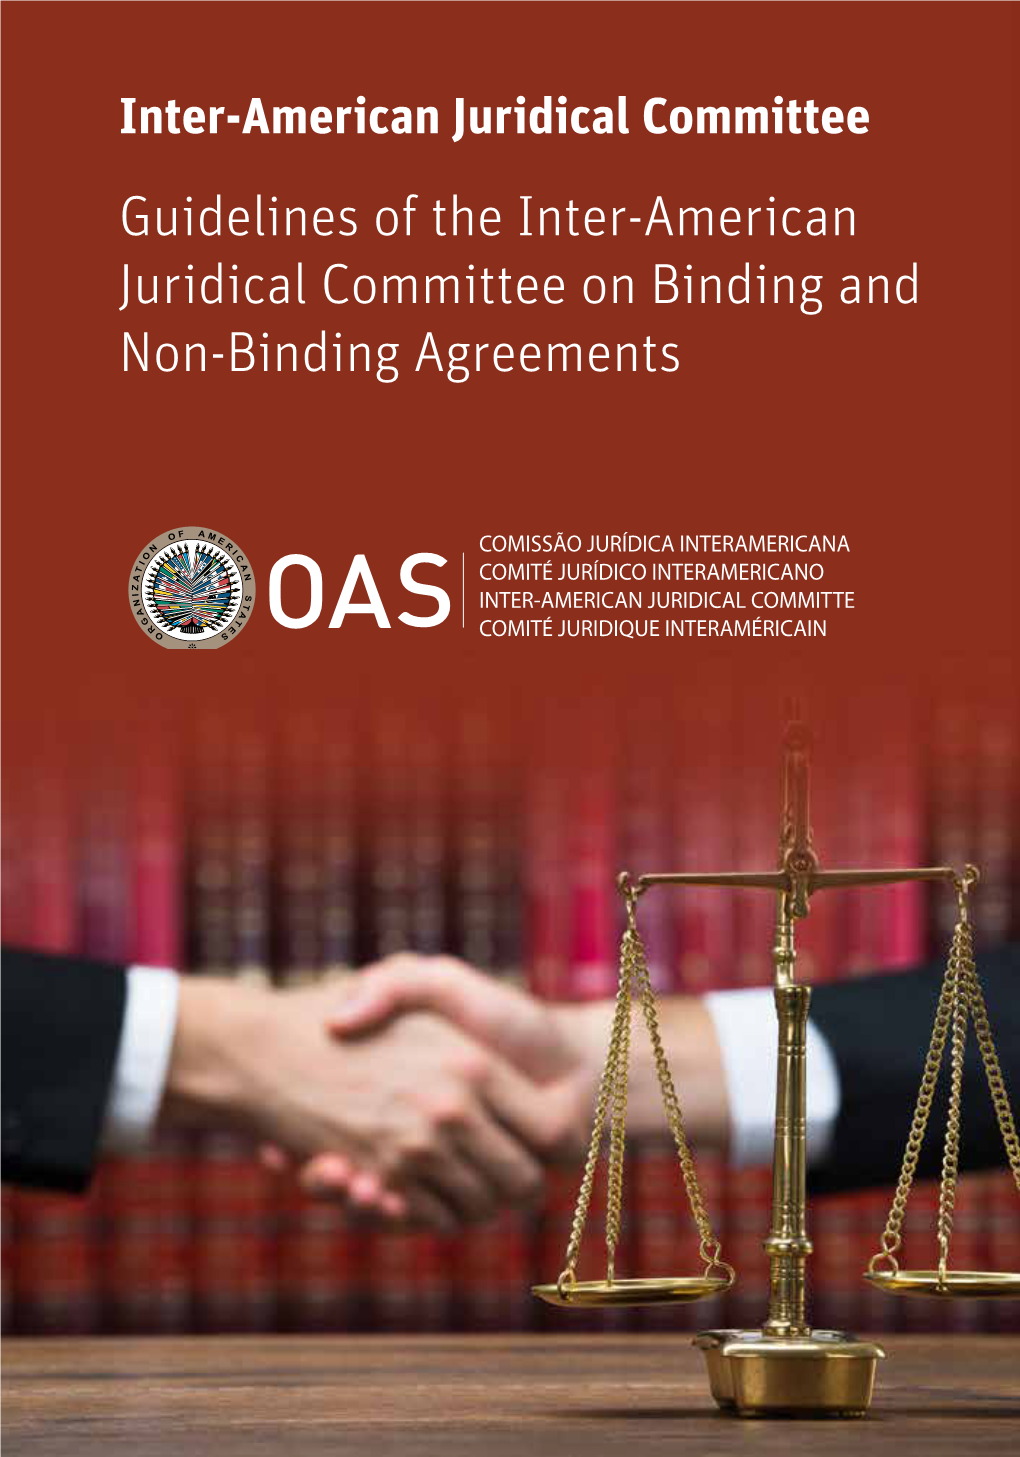 Guidelines of the Inter-American Juridical Committee on Binding and Non-Binding Agreements